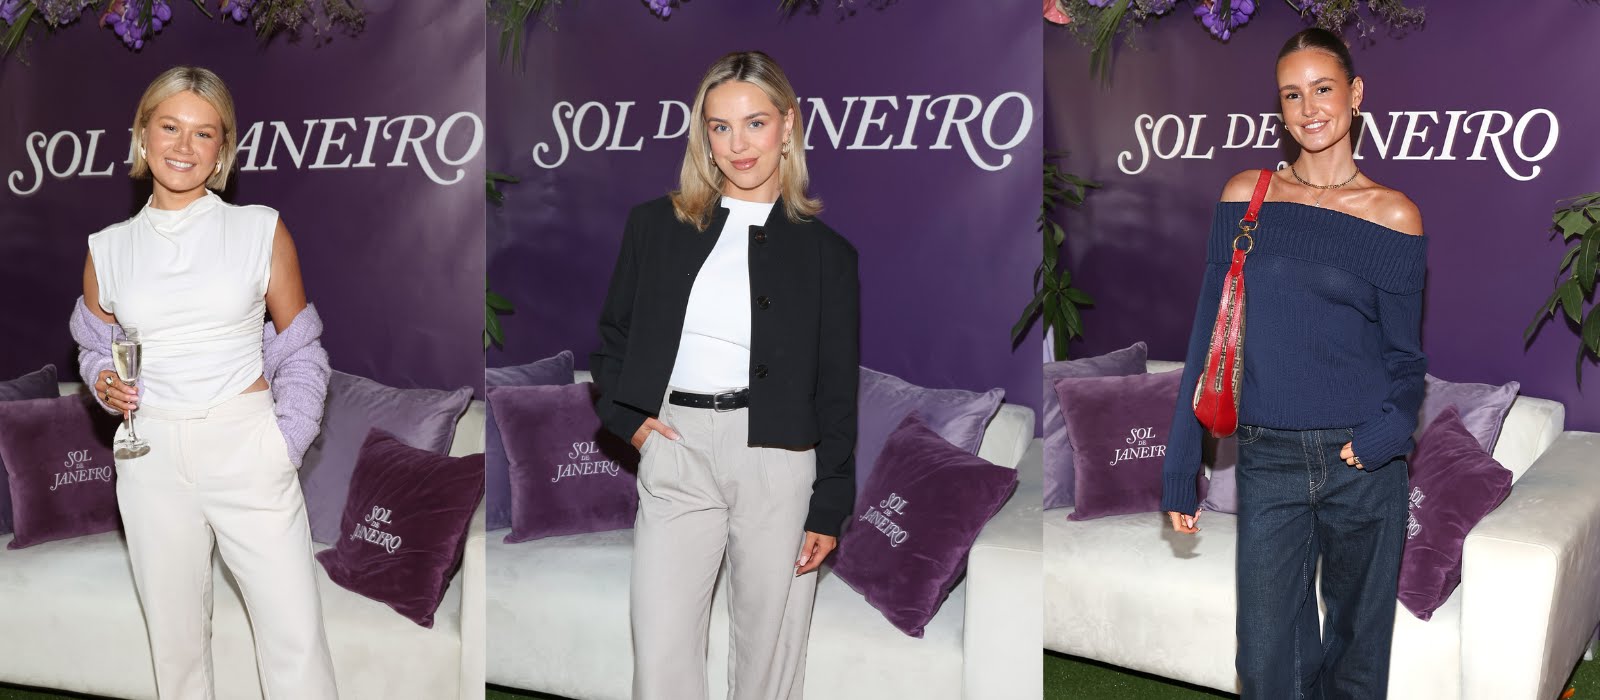 Social Pictures: The Sol de Janeiro new product launch in Dublin